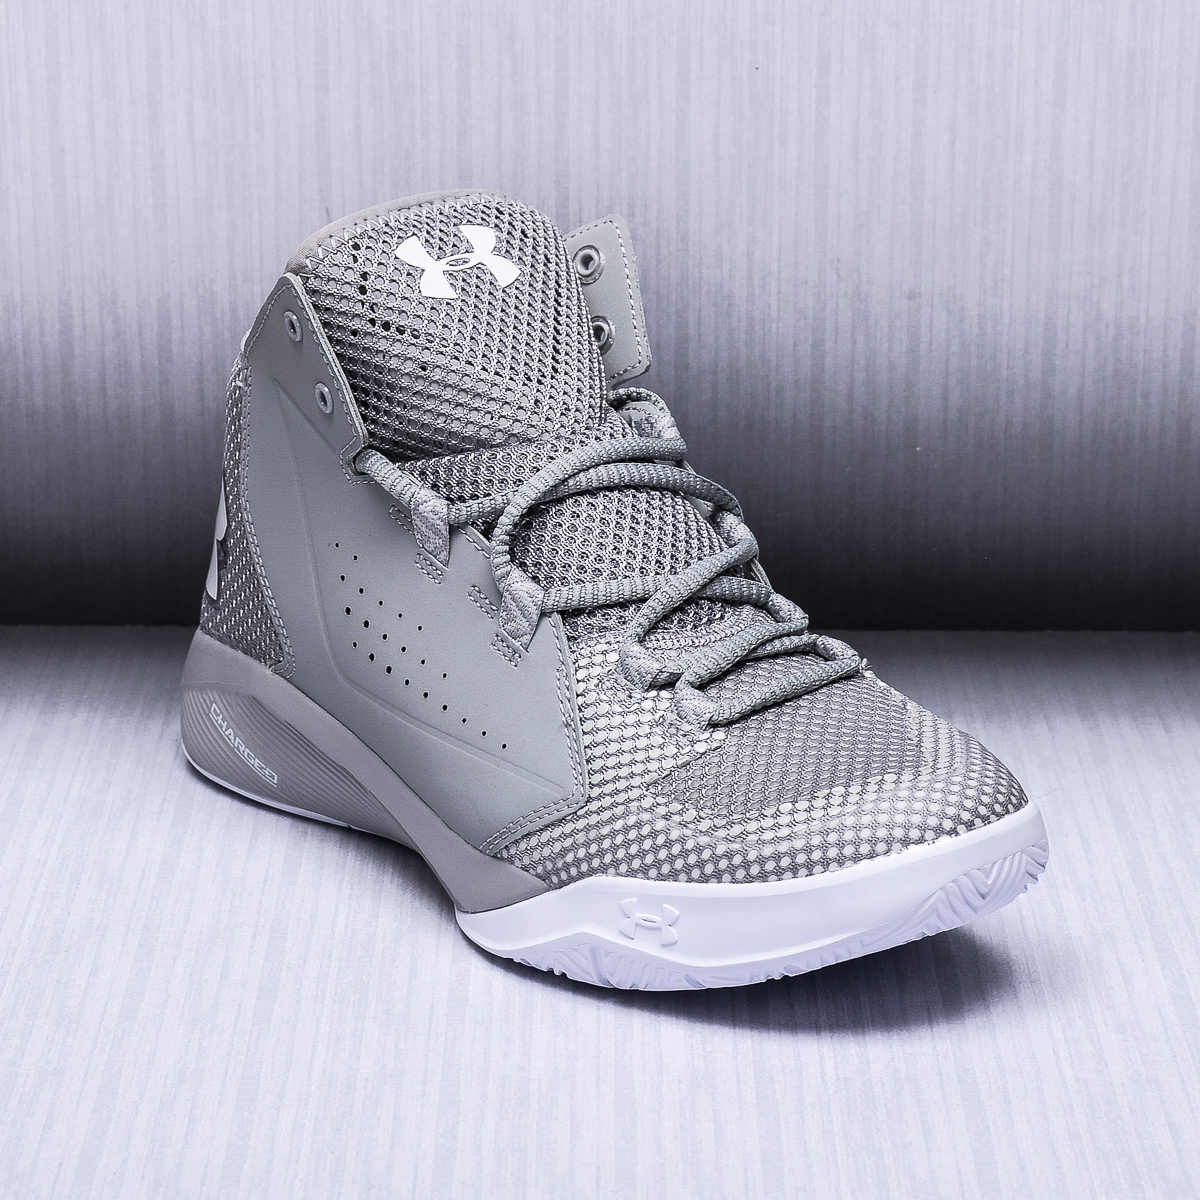 gray under armour basketball shoes